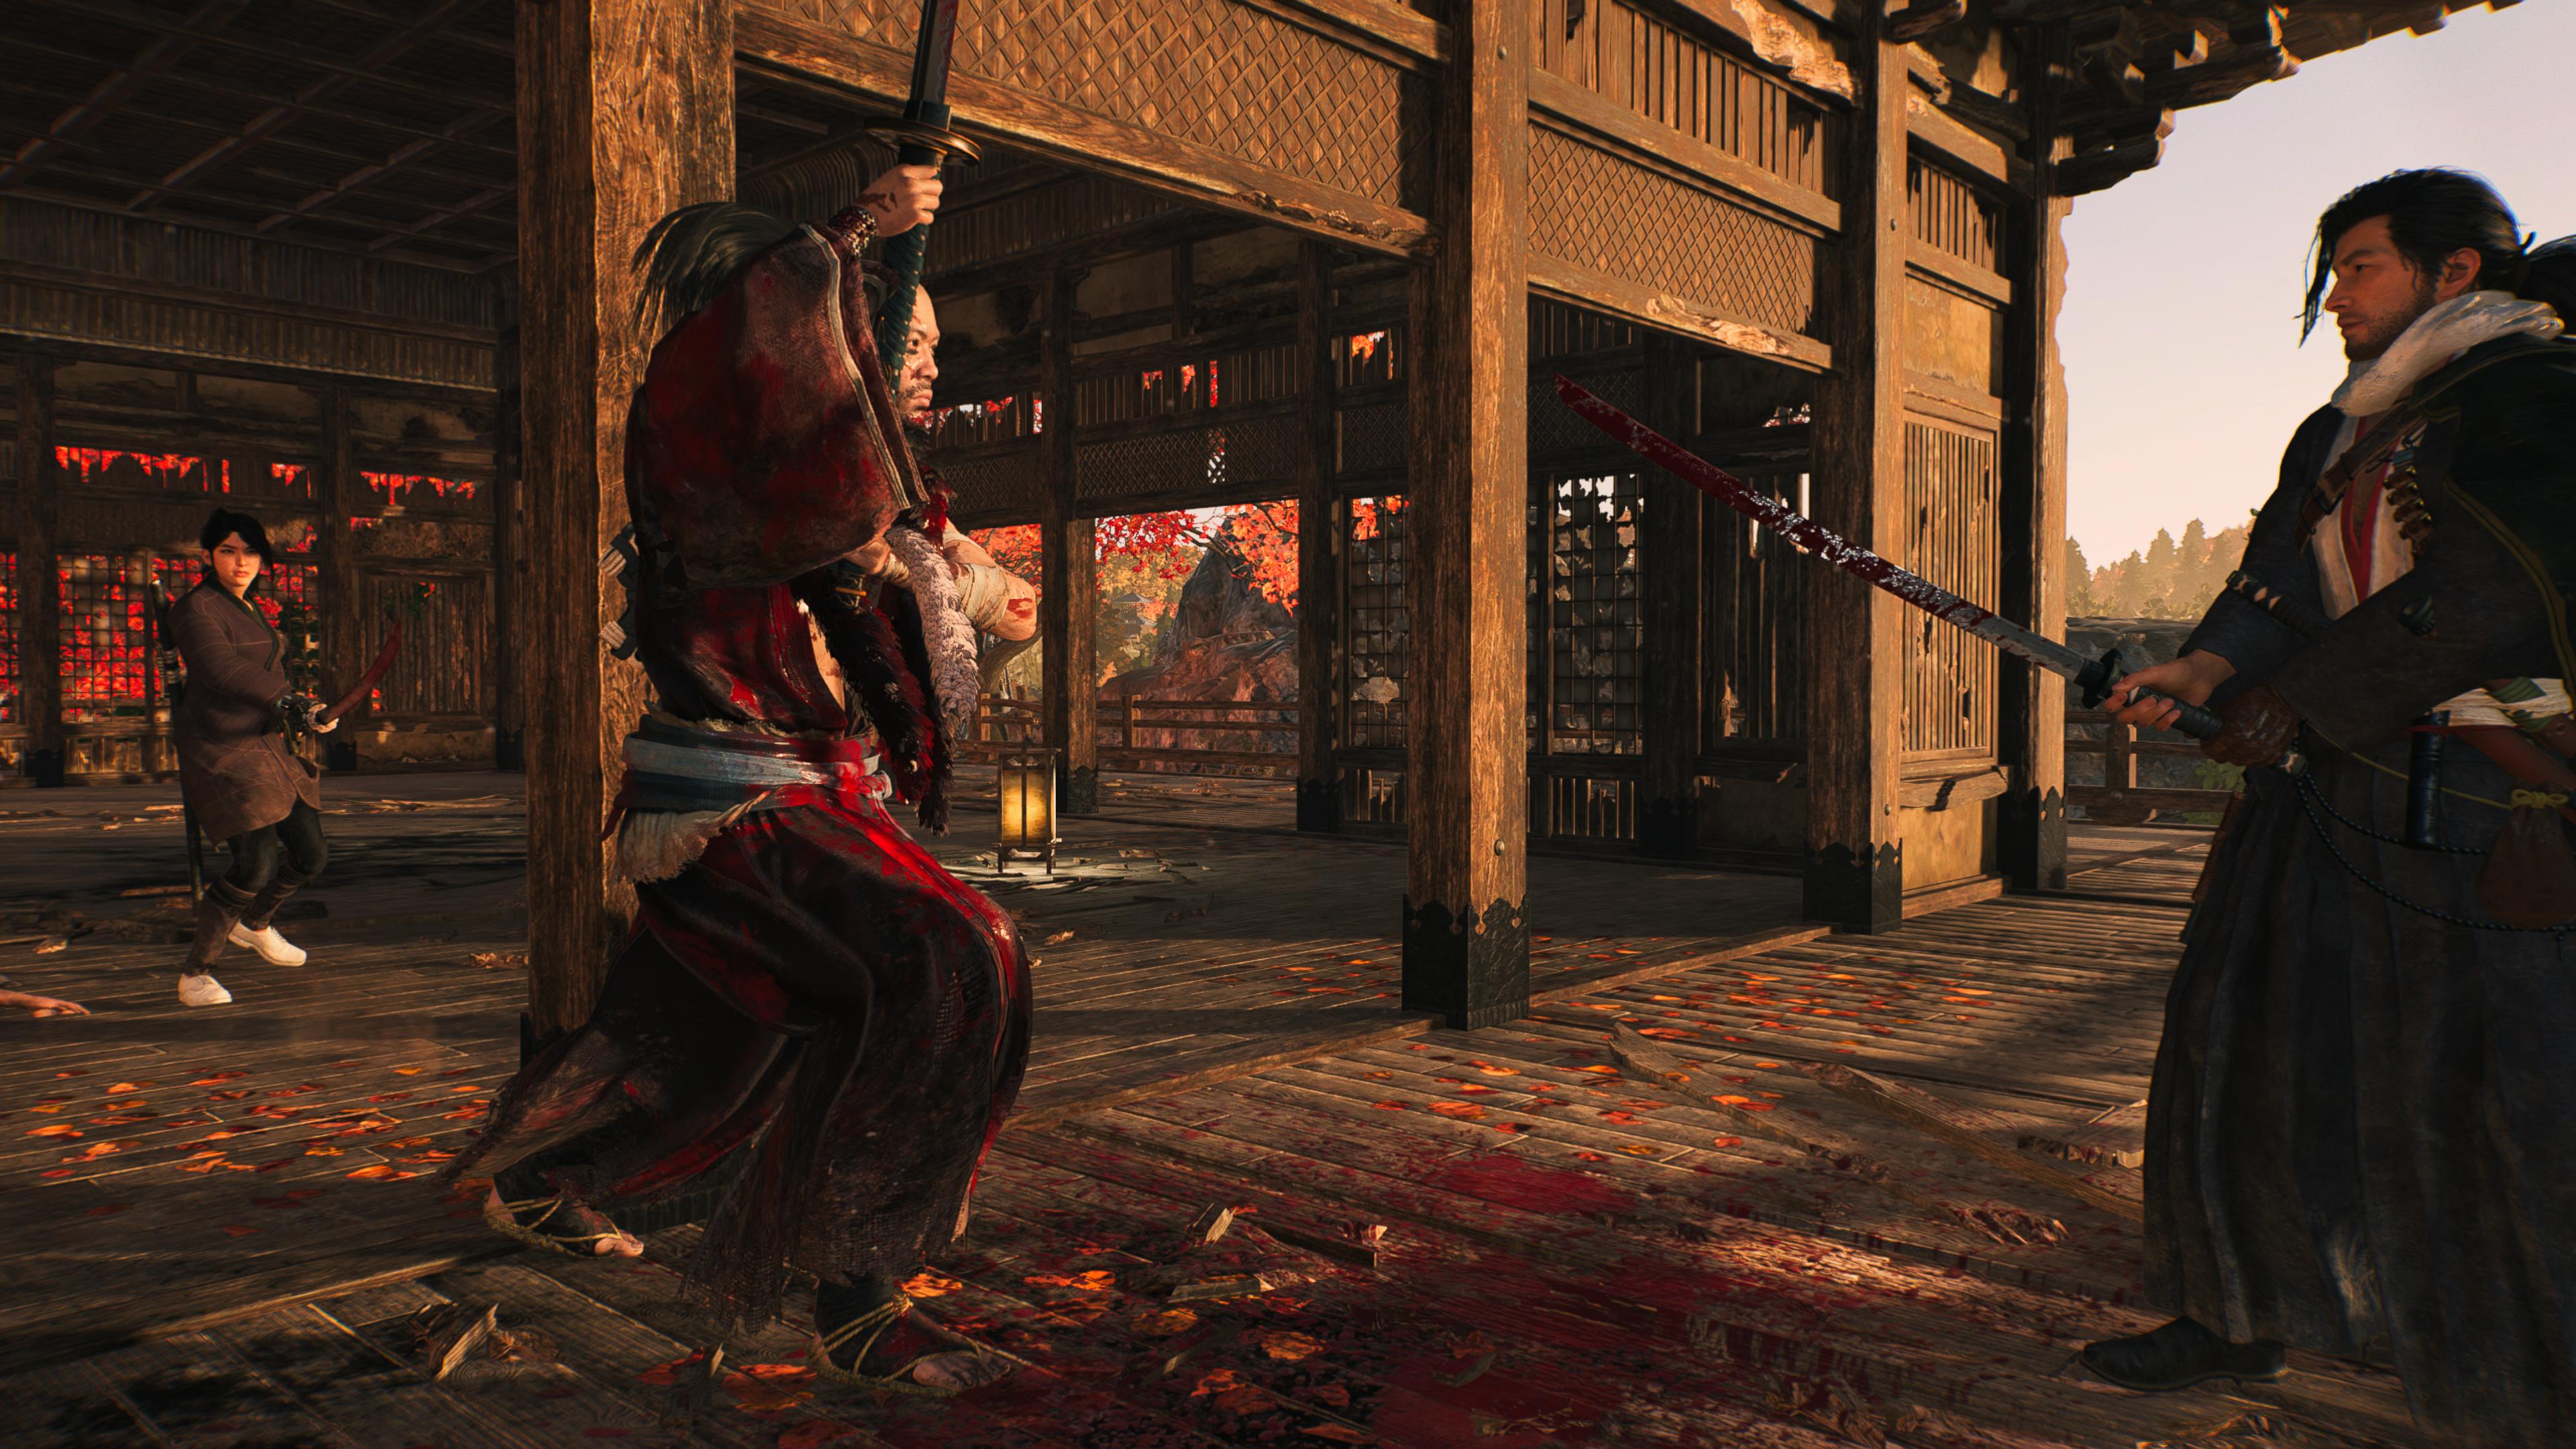 Reseña: Rise of the Ronin, ¿Vale la pena? 50